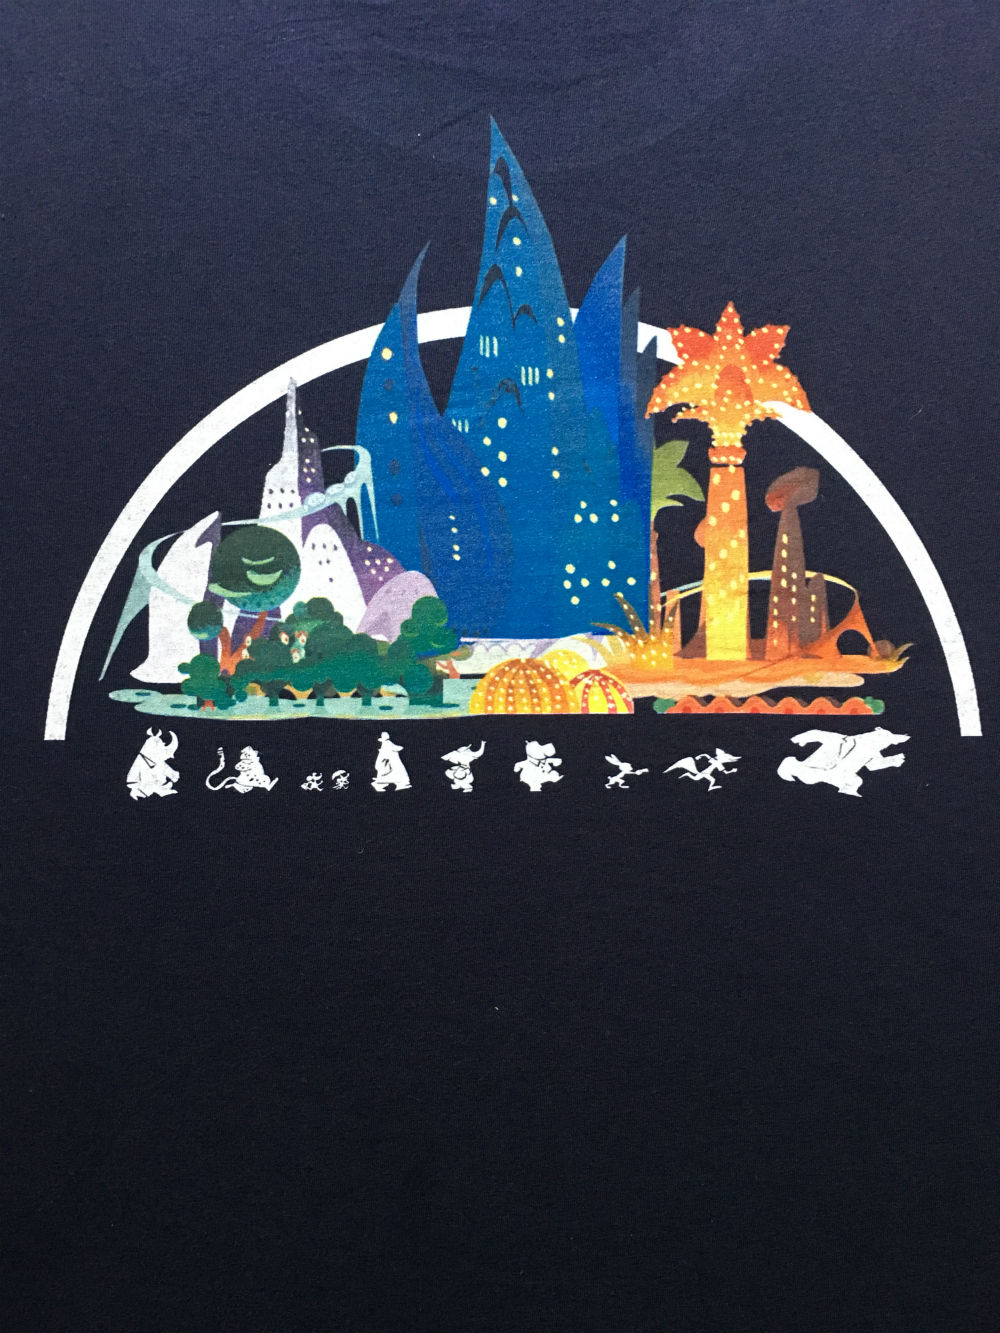 Unfortunately, You Can Never Buy These Incredible Disney Animation T-Shirts